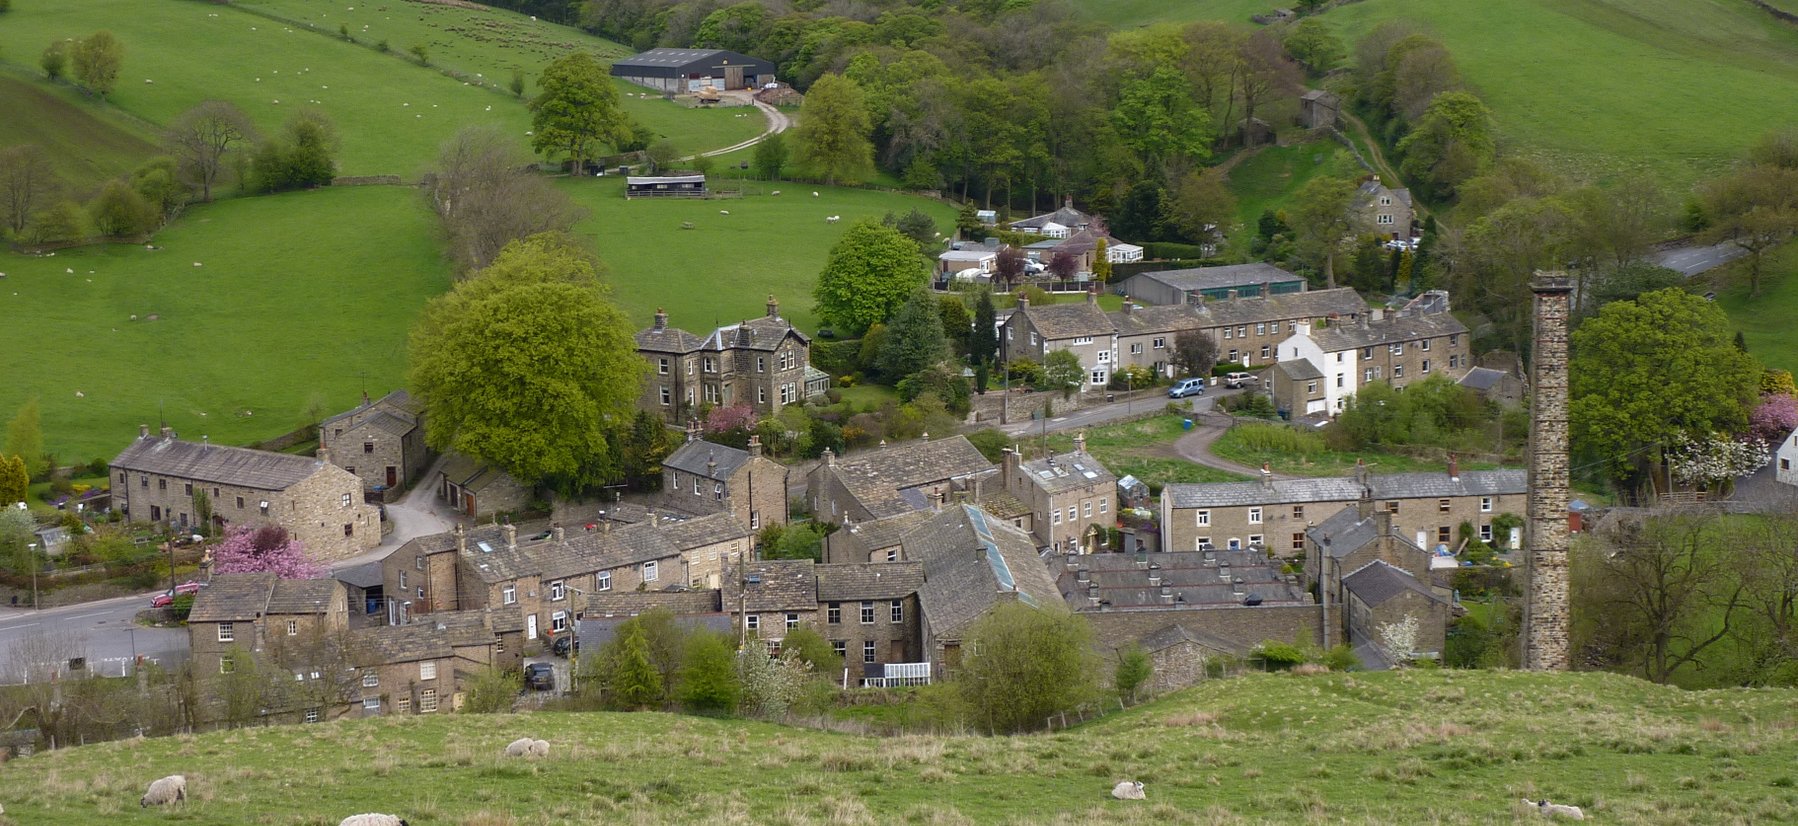 Dropping into Lothersdale with its tall chimney